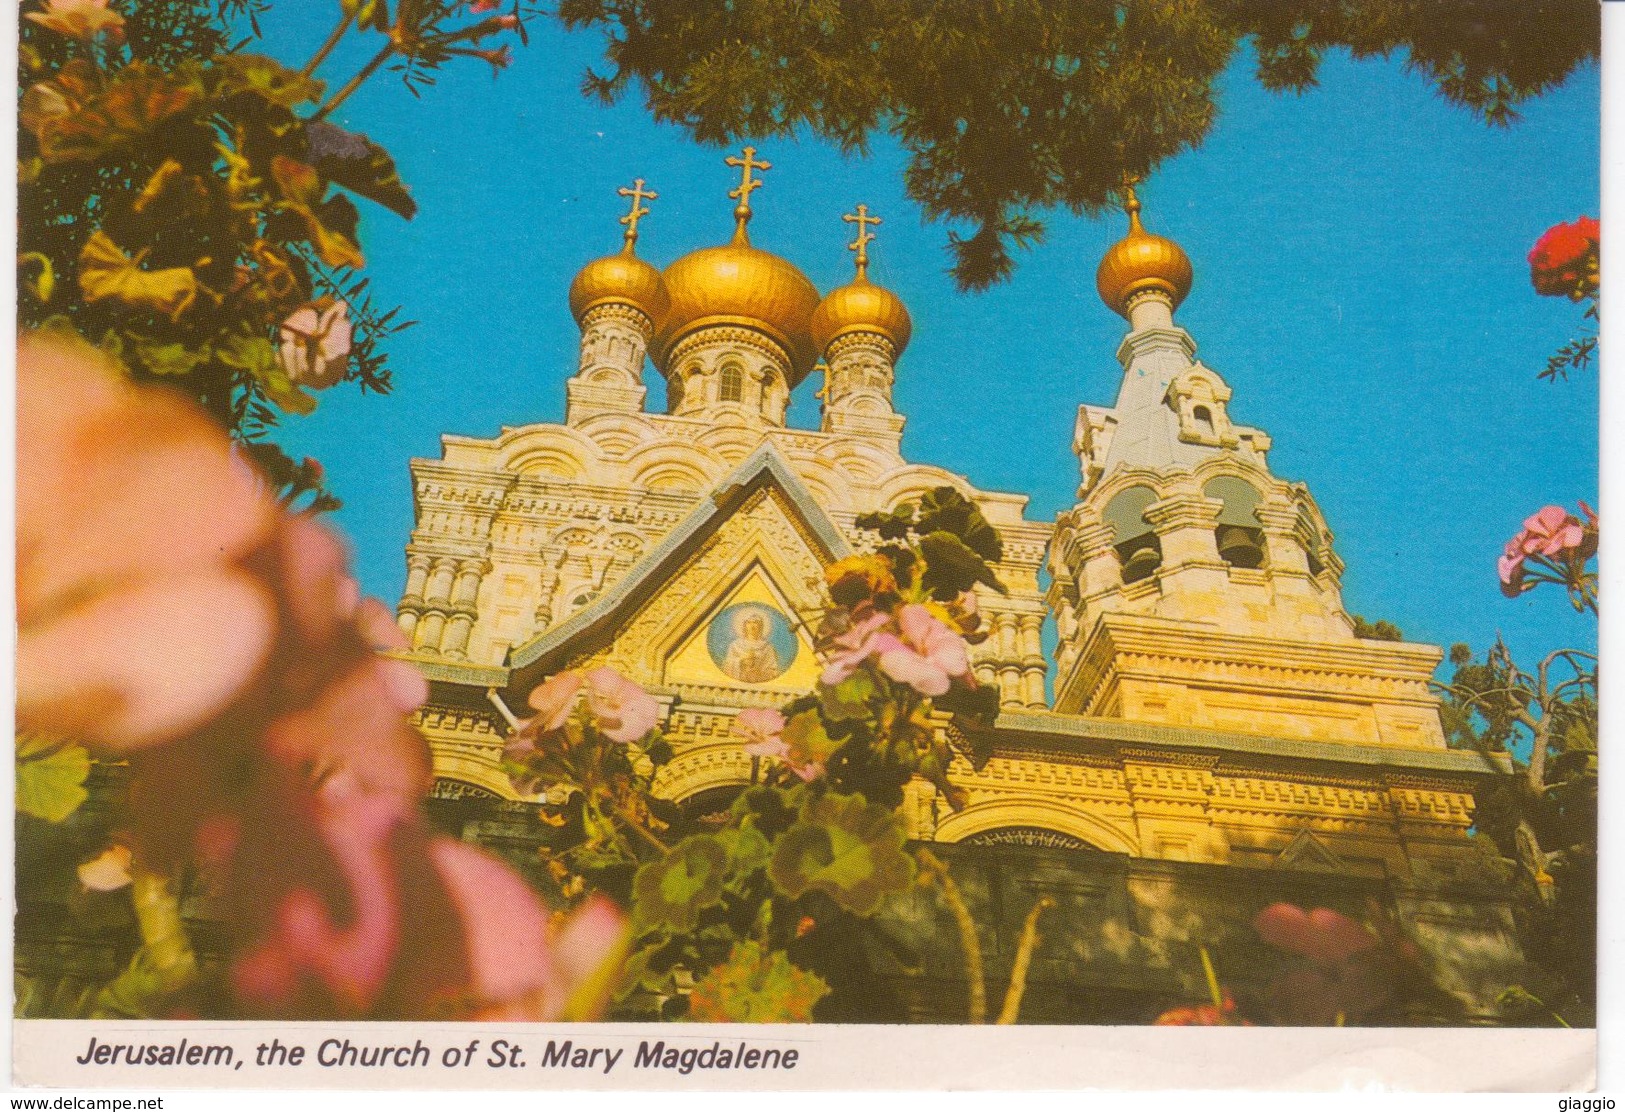 °°° 13422 - ISRAEL - JERUSALEM - THE CHURCH OF ST. MARY MAGDALENE - 1988 With Stamps °°° - Israele